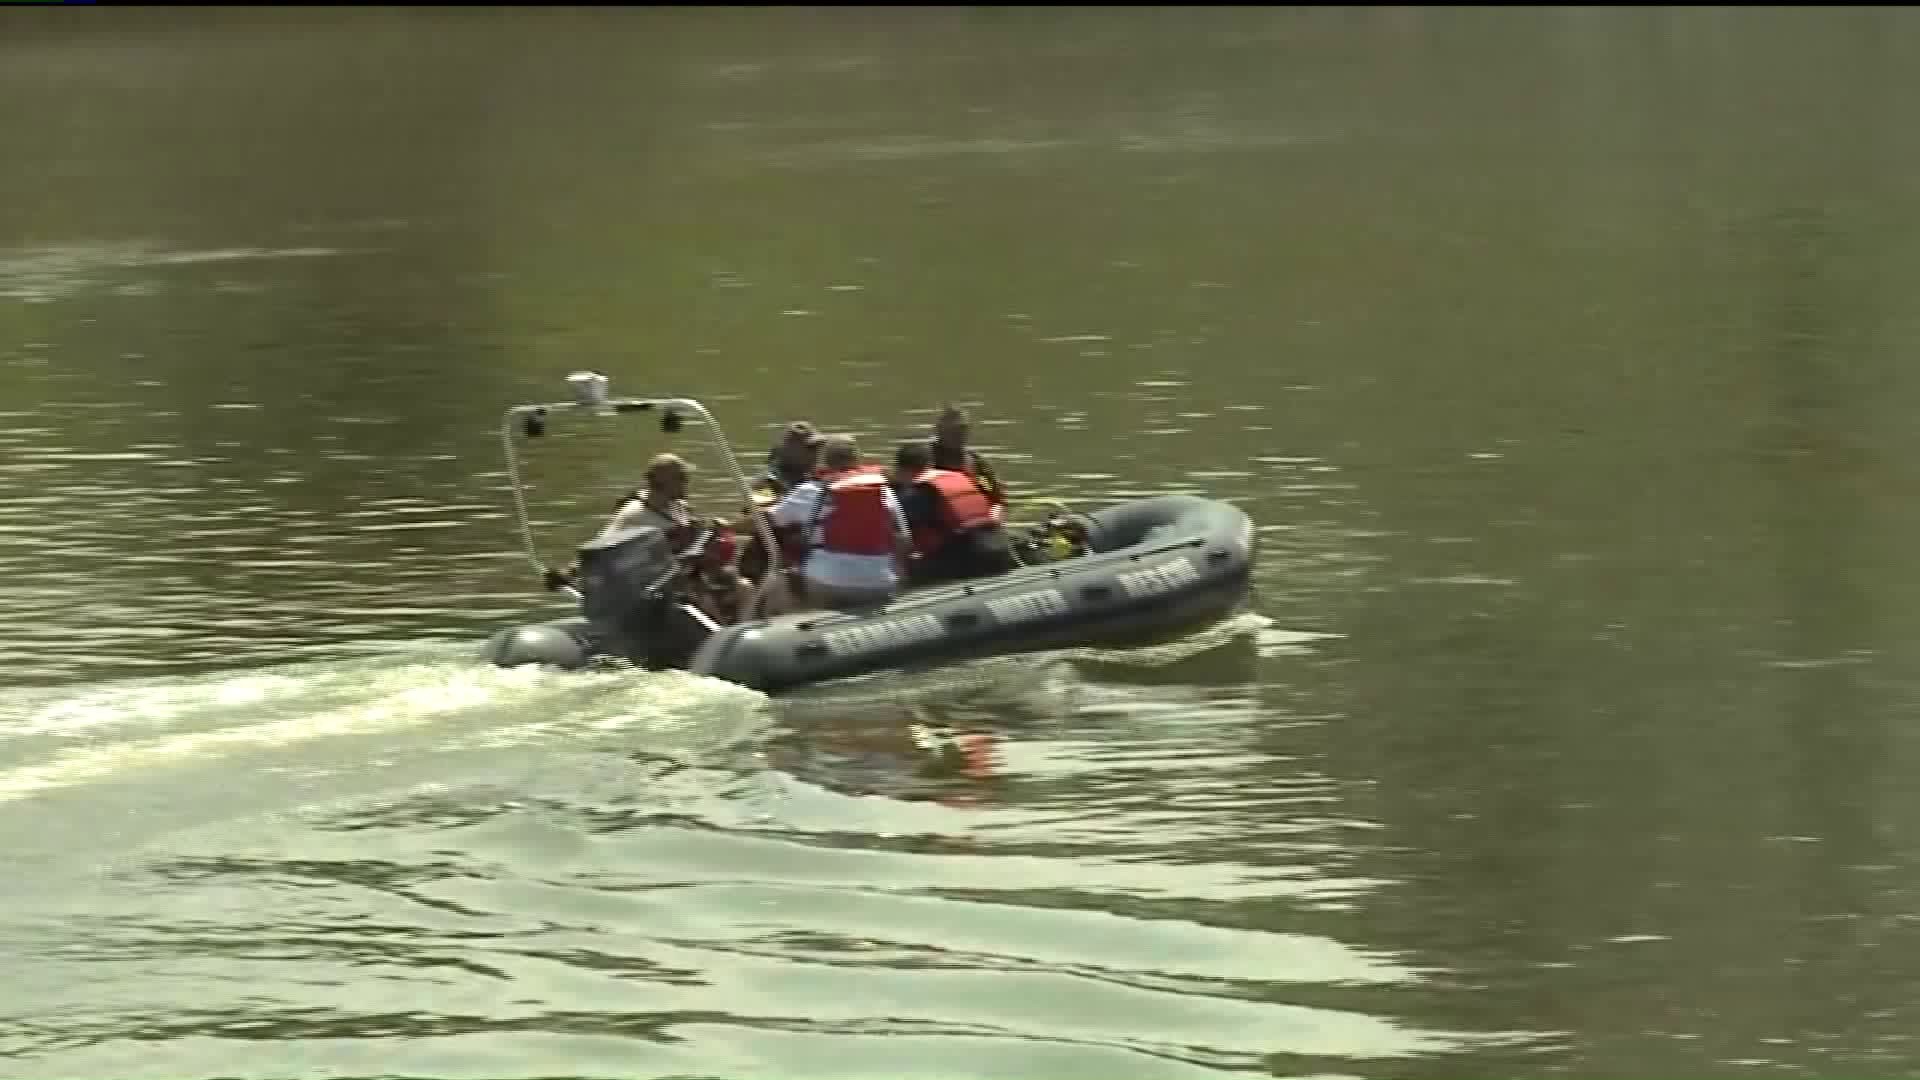 Search Underway for Missing Man in Susquehanna River